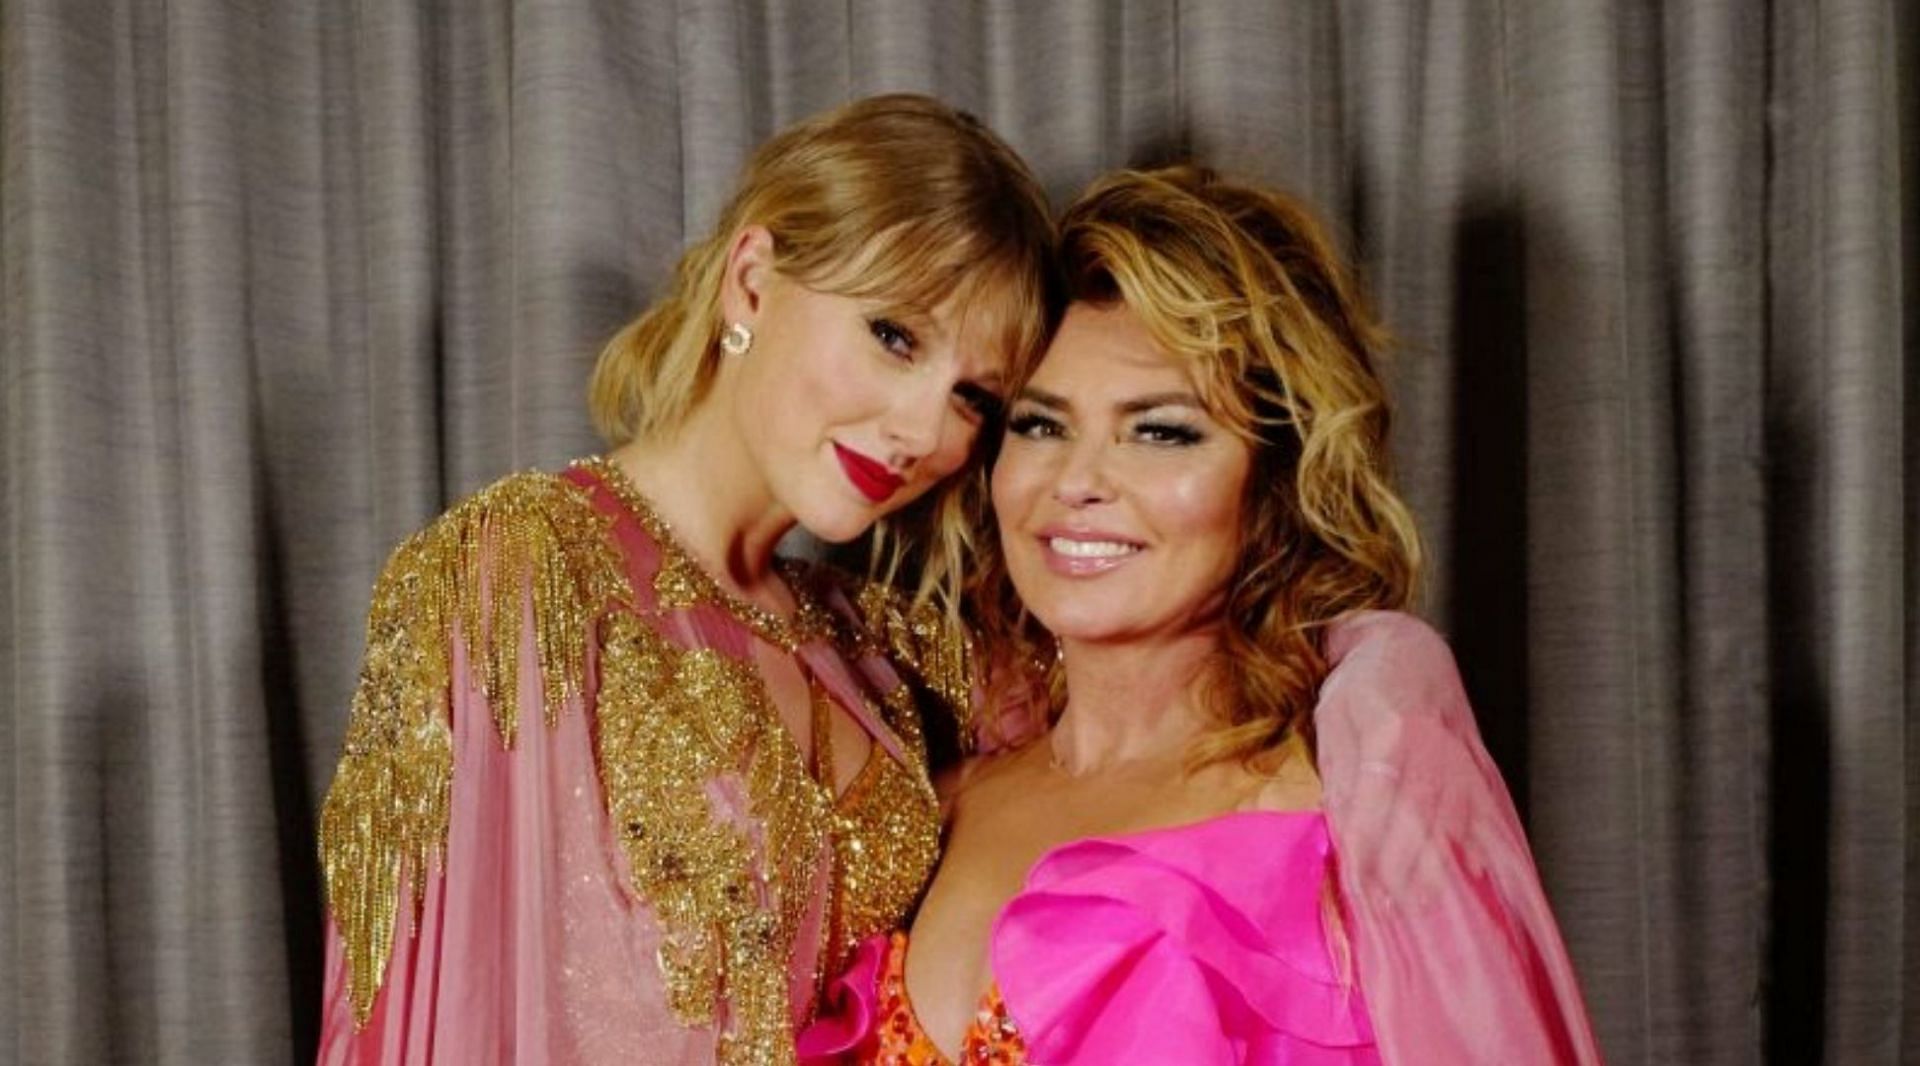 Taylor Swift and Shania Twain have always had the utmost admiration for each other (Image via Getty)